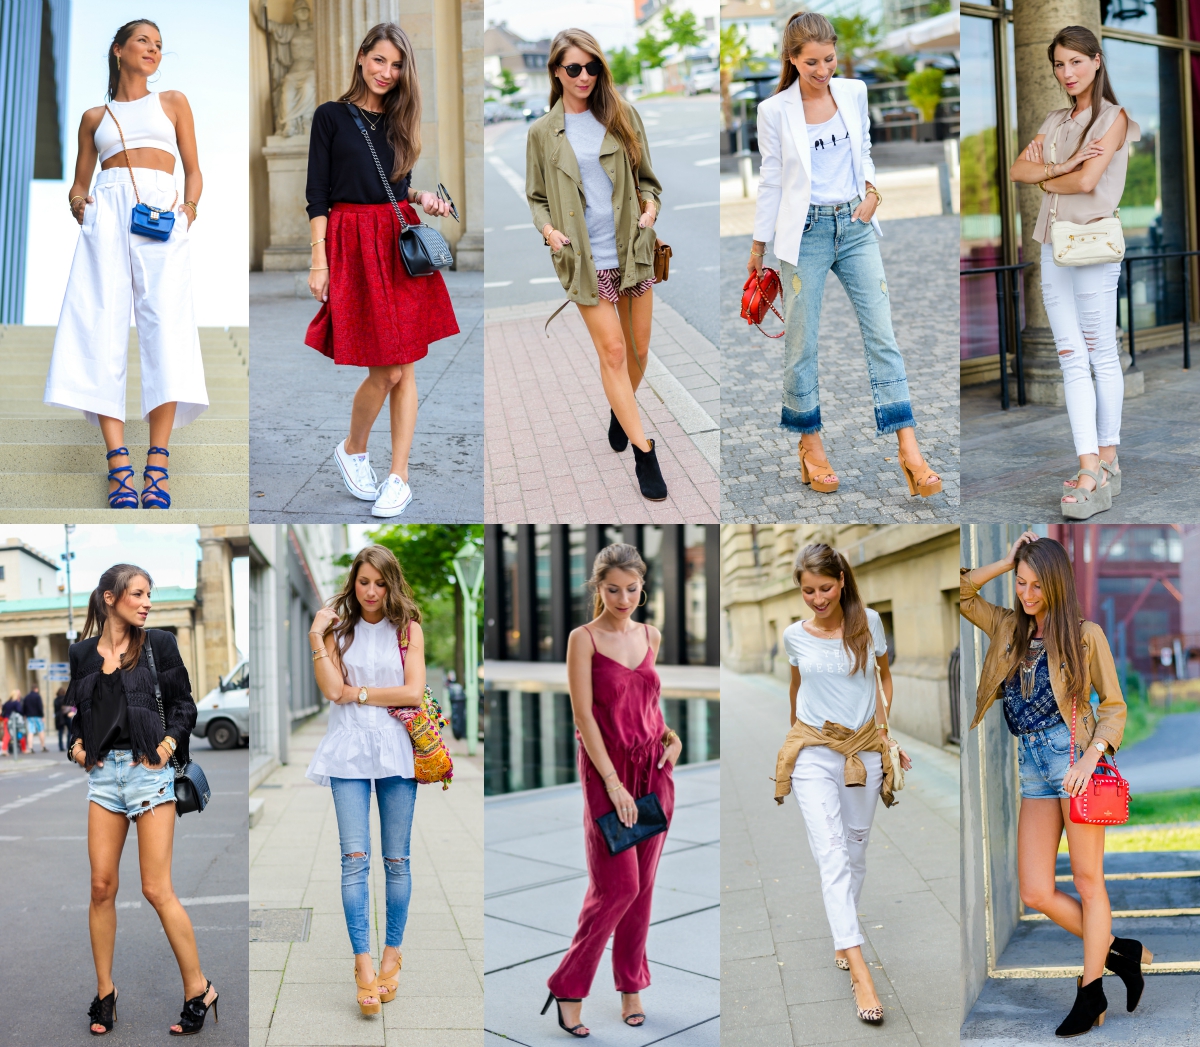 JULY OUTFIT REVIEW: WHAT’S YOUR FAVORITE?